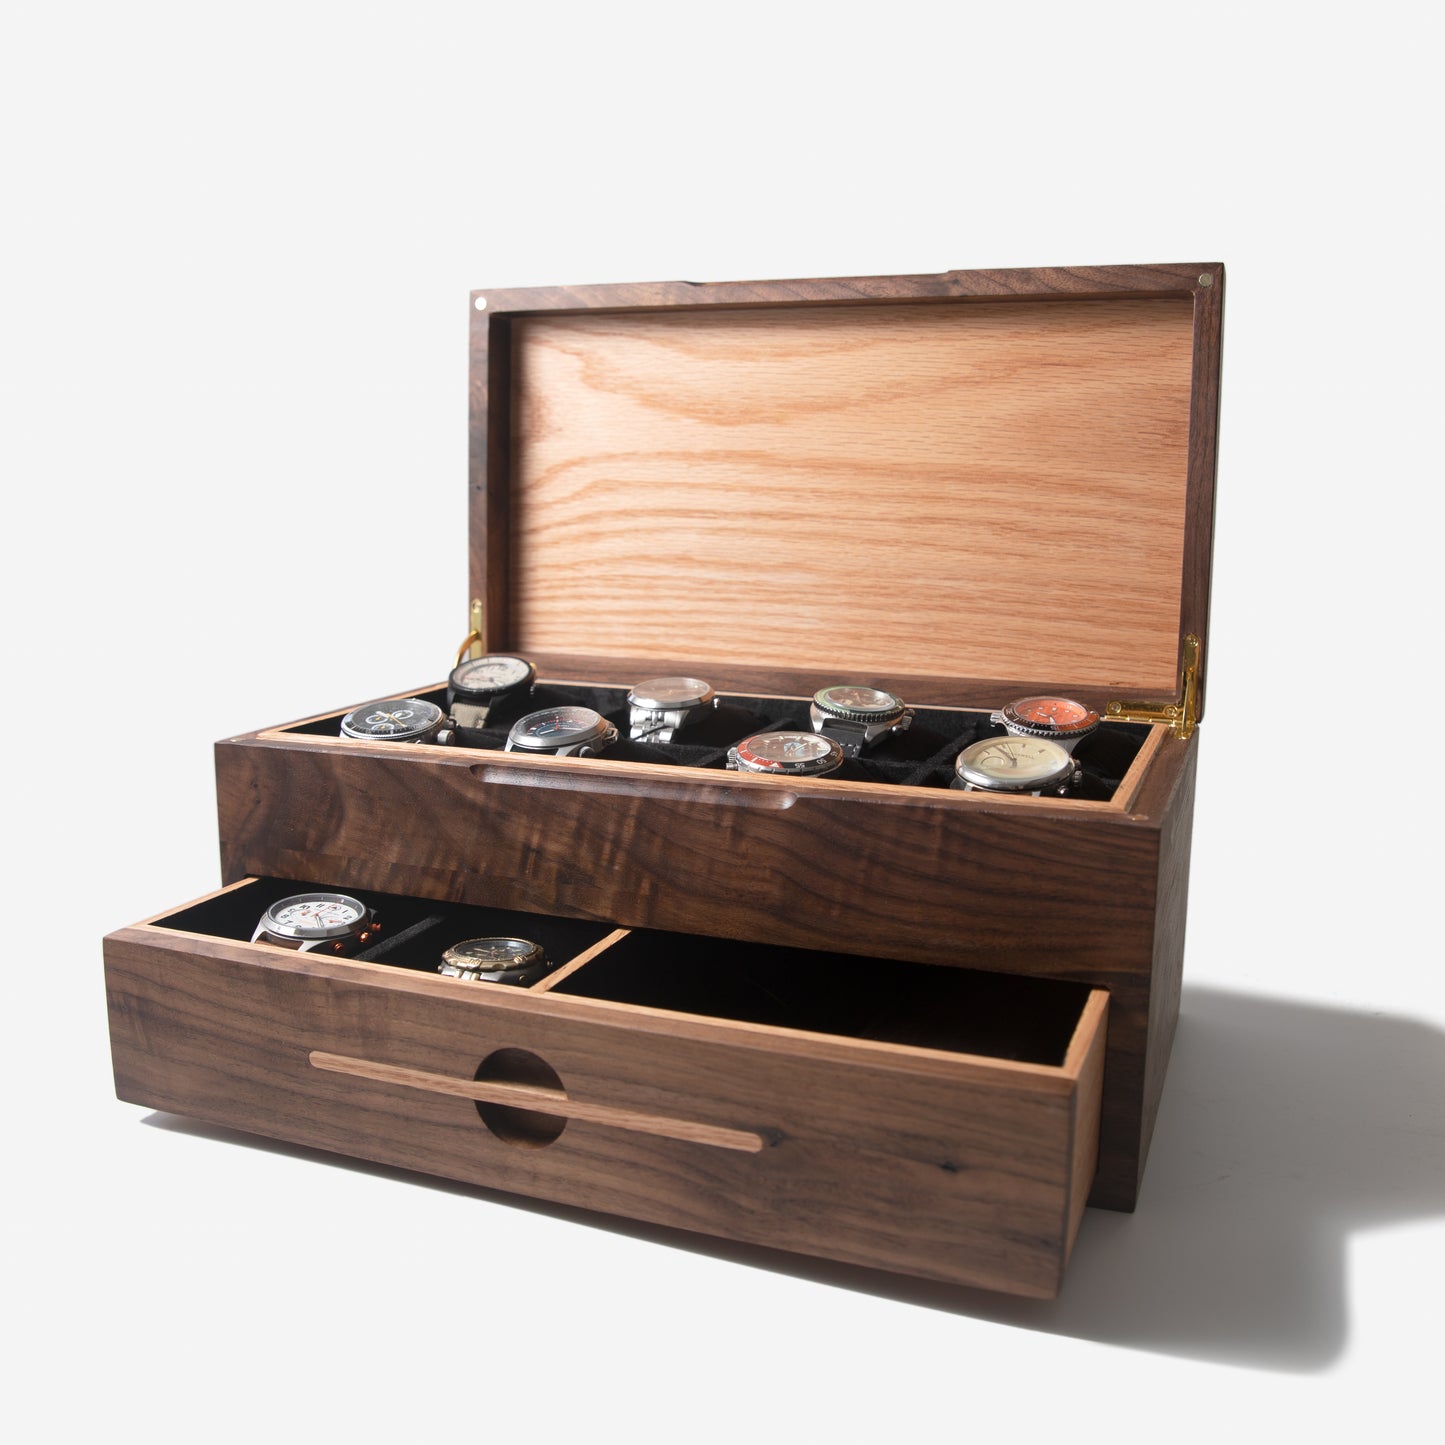 Watch Box with Drawer - Black Walnut and Oak - 12 to 16 Watch Compartments - Personalized Gift